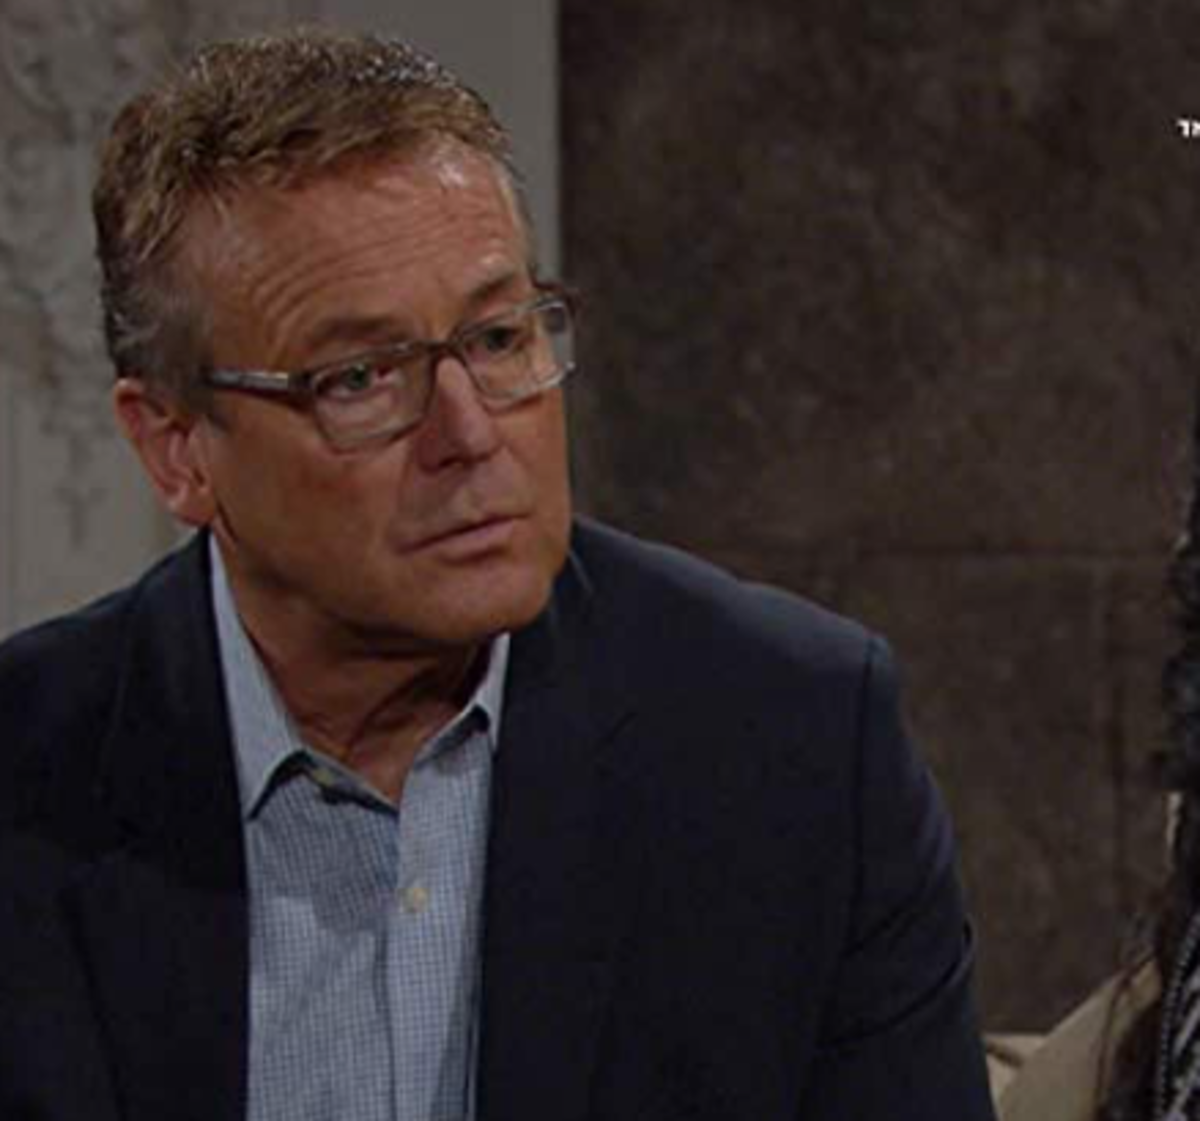 Doug Davidson Suggests He Will Give an Interview to Explain What Happened on the Young and the Restless